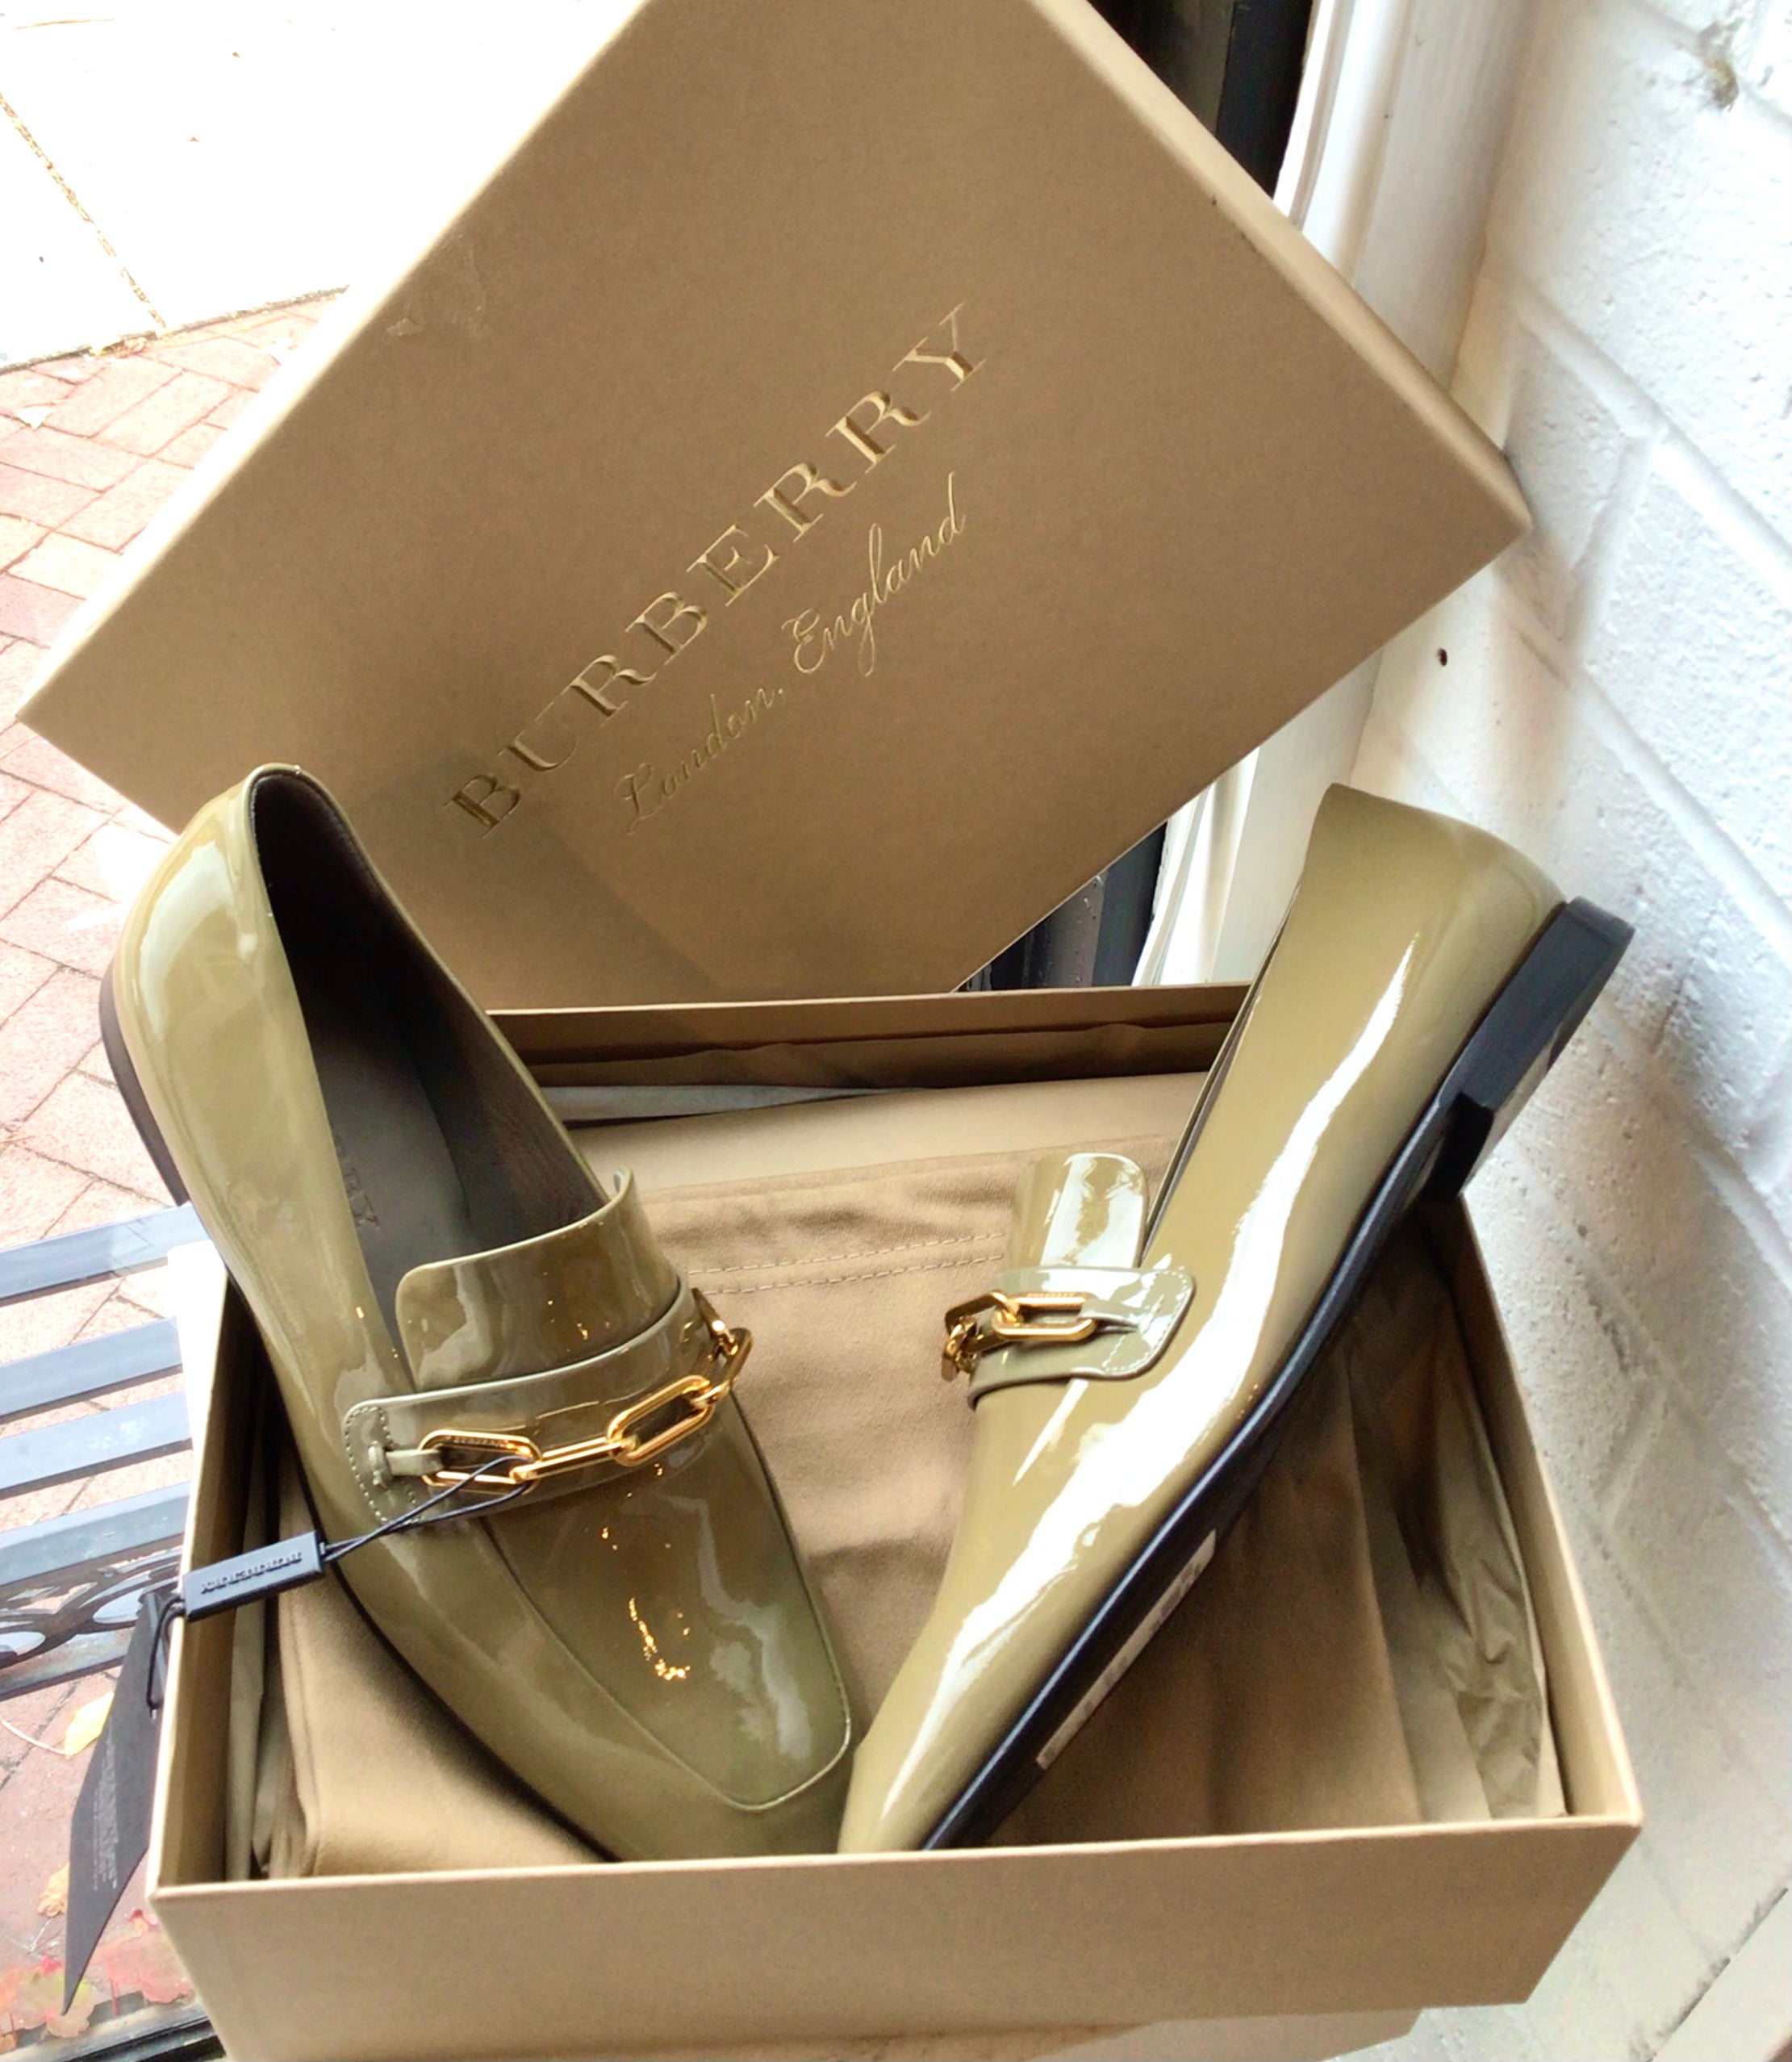 Burberry Patent Leather Loafers